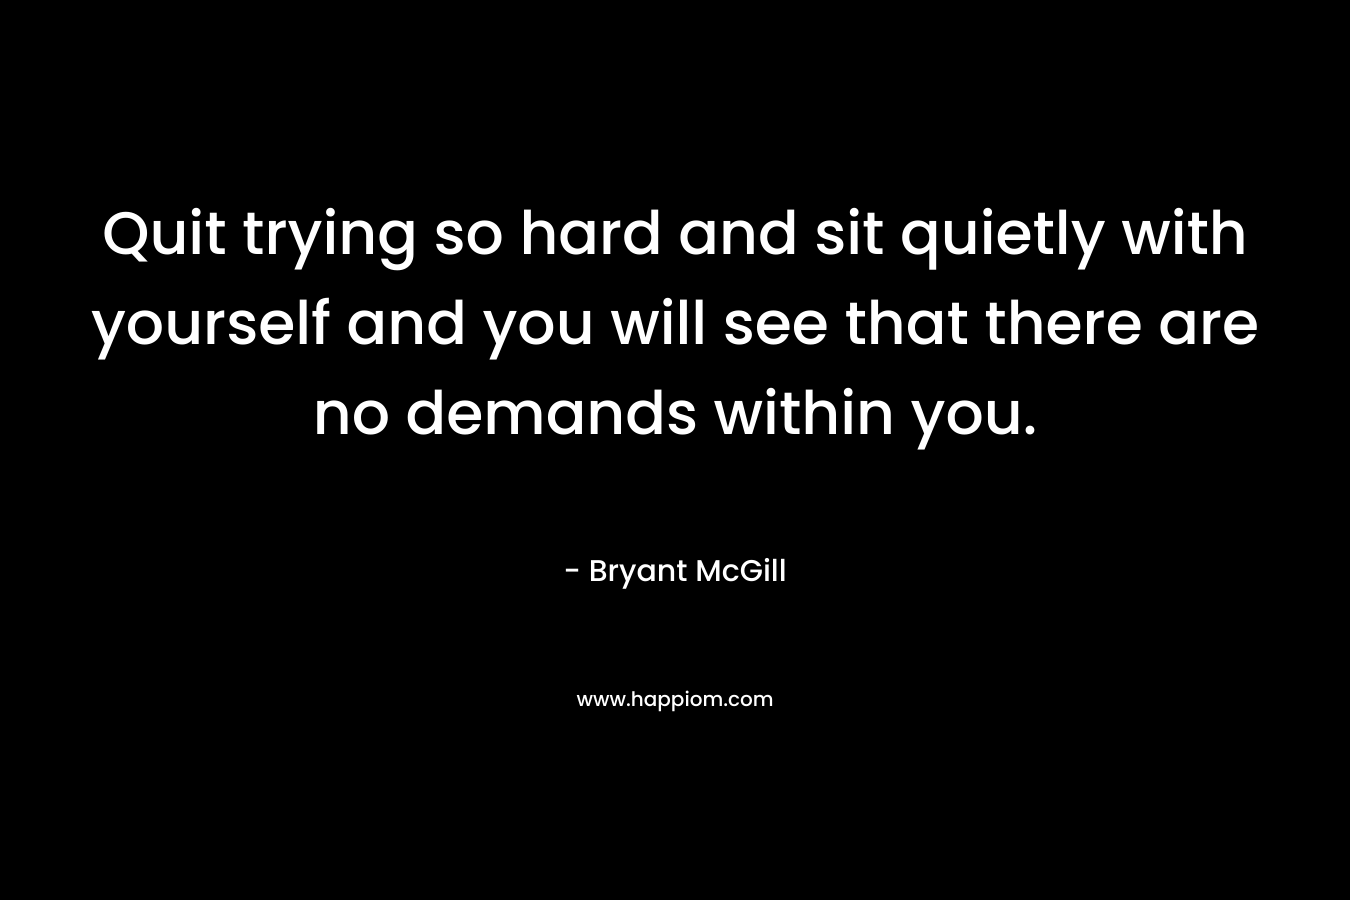 Quit trying so hard and sit quietly with yourself and you will see that there are no demands within you.